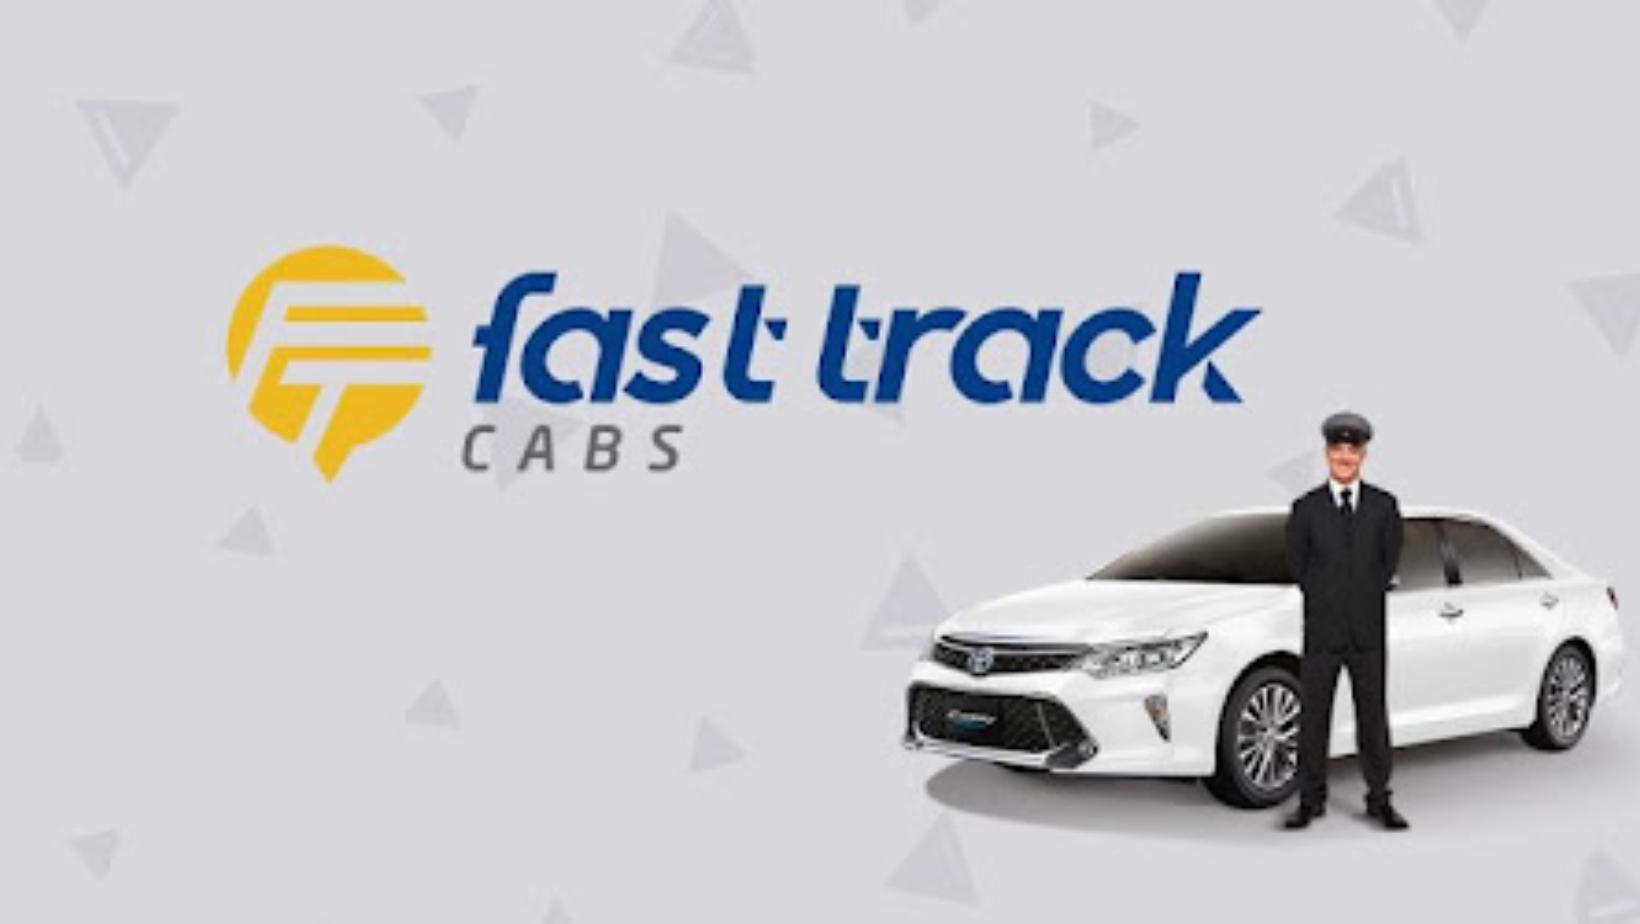 Fasttrack Taxi